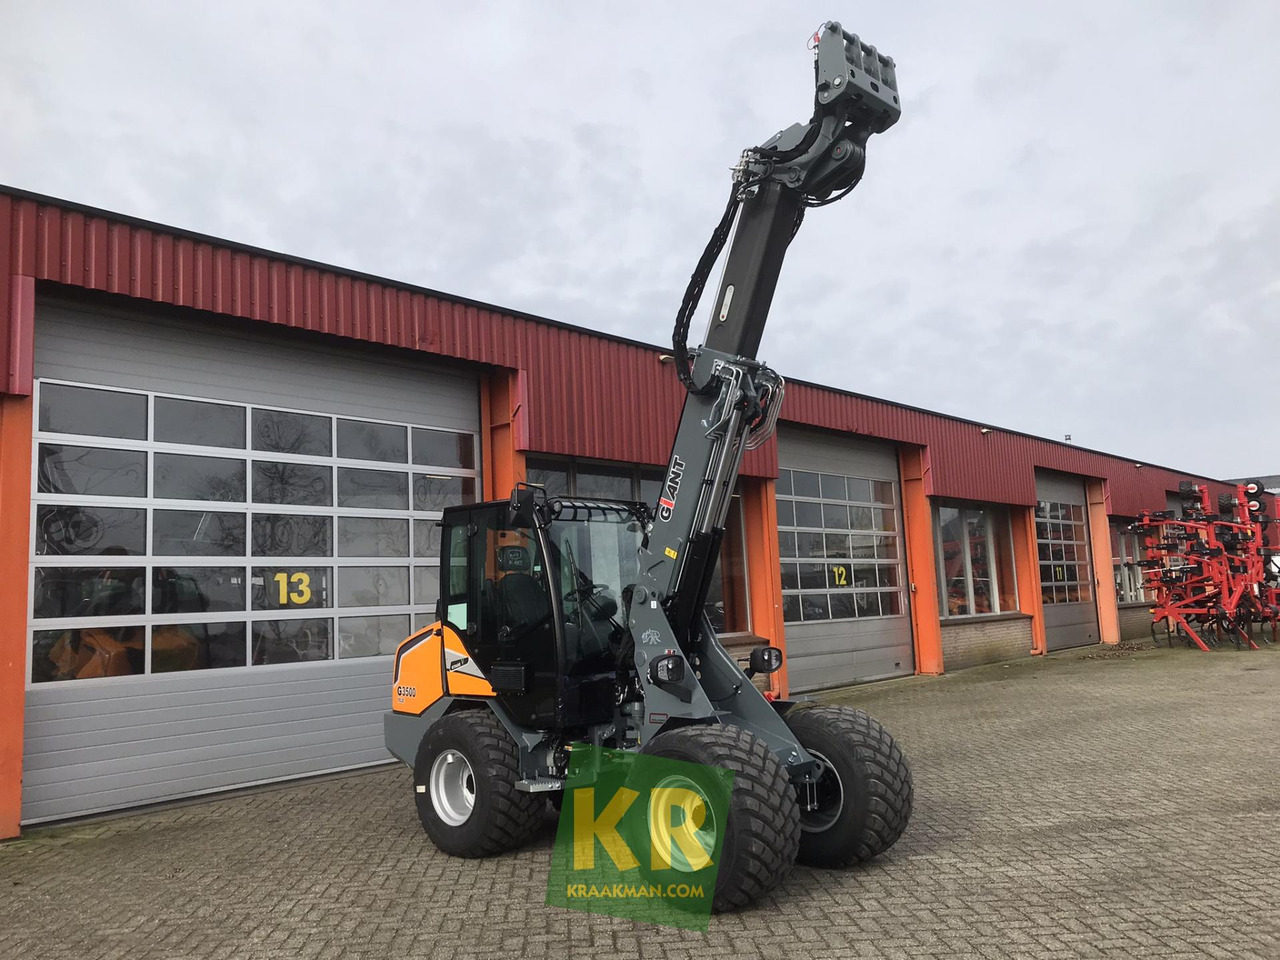 Compact loader G3500 Tele Giant